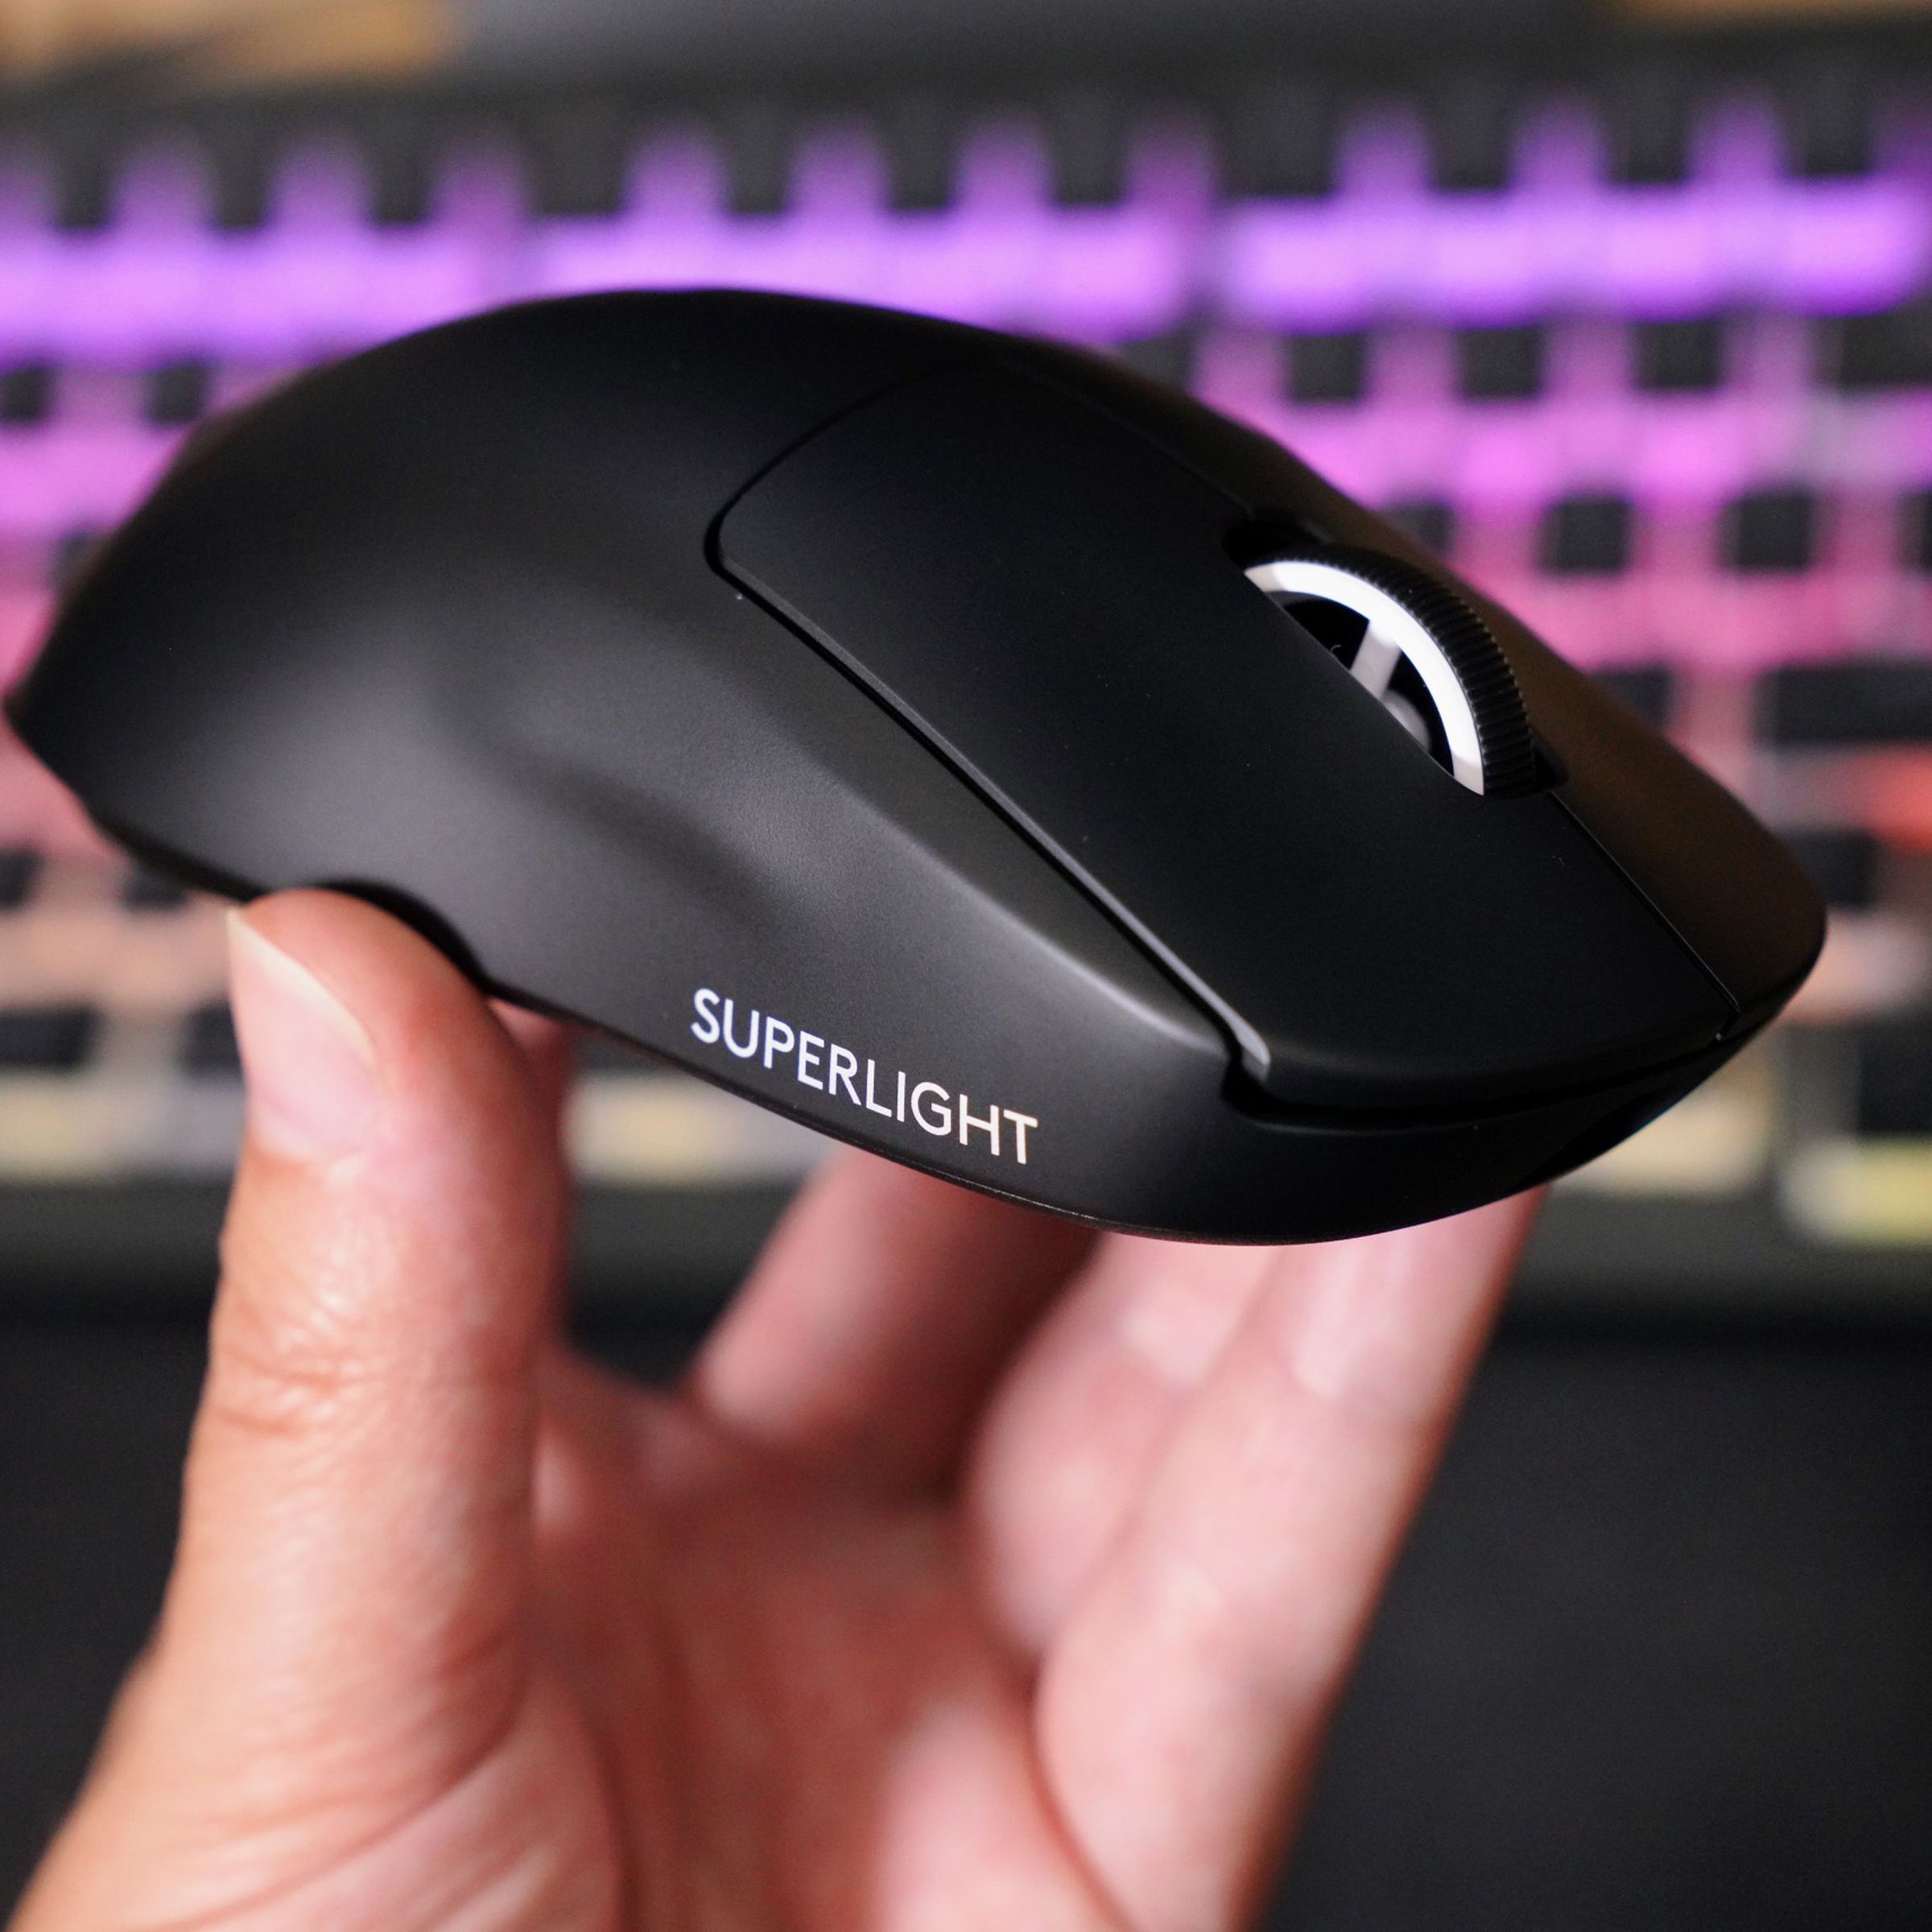 A hand holds up a jet black sculpted plastic mouse with a white scroll wheel and white words “Superlight” printed on the side.